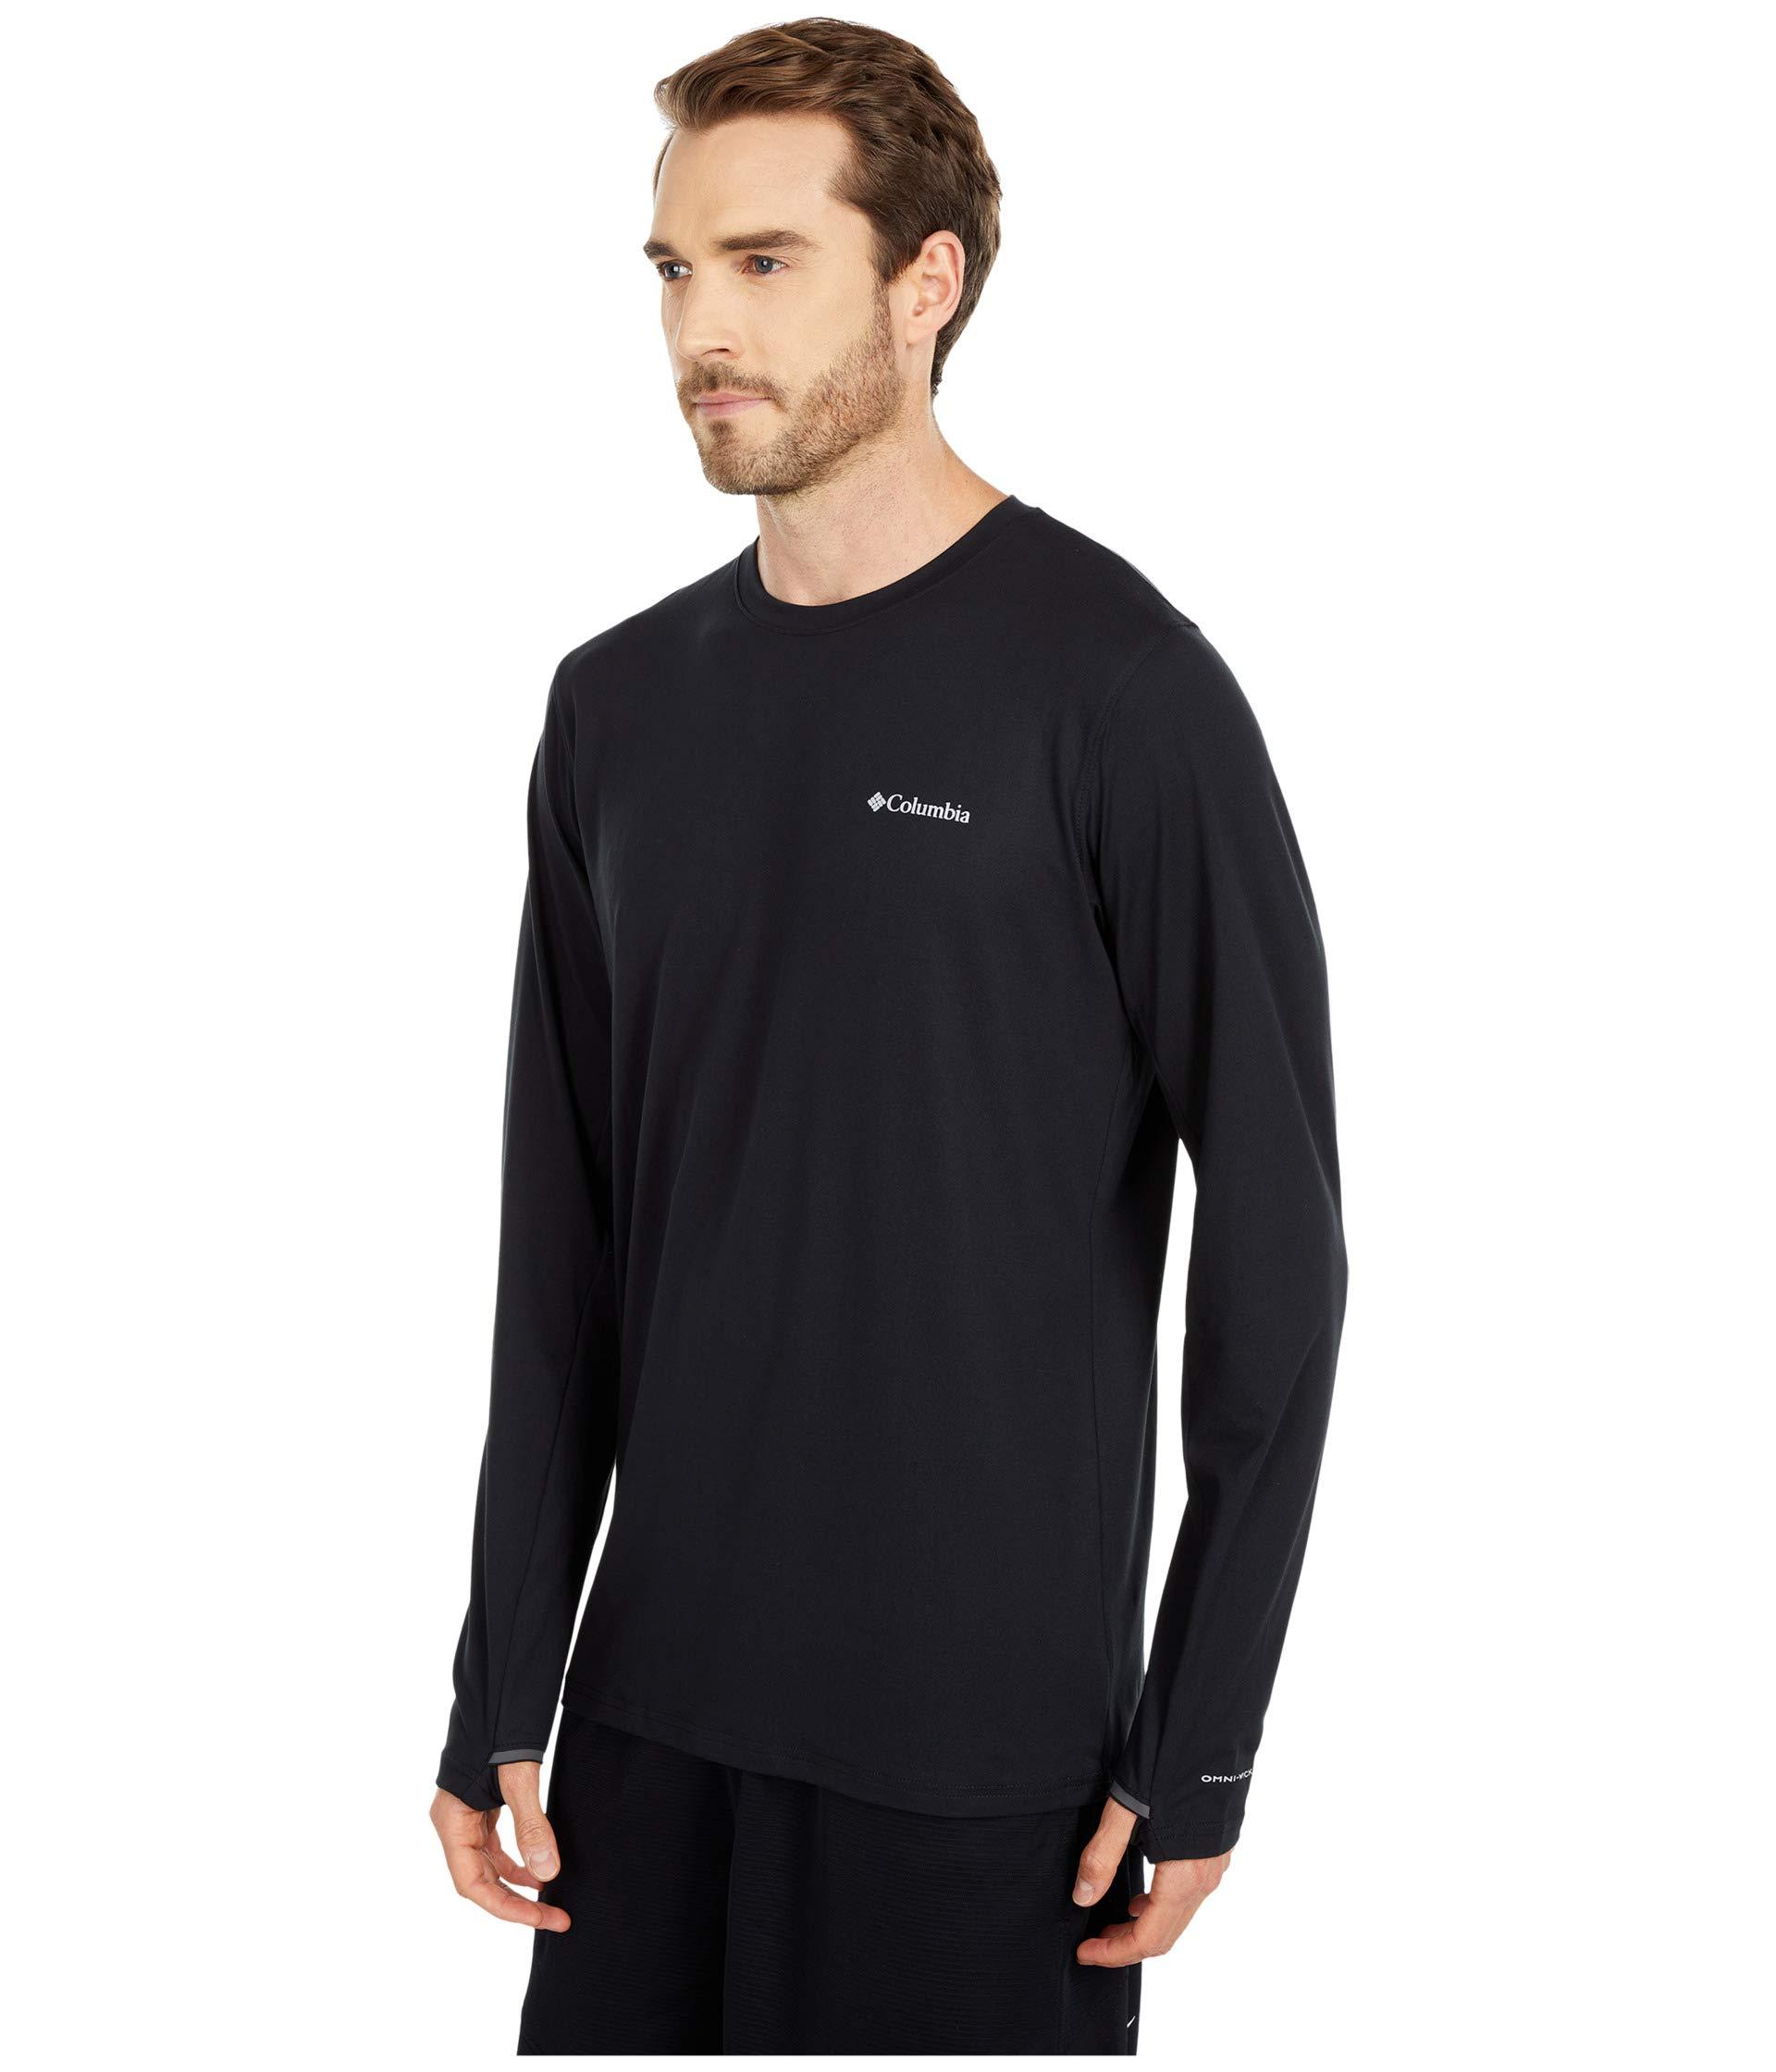 Columbia Synthetic Tech Trail Long Sleeve Crew Ii in Black for Men - Lyst